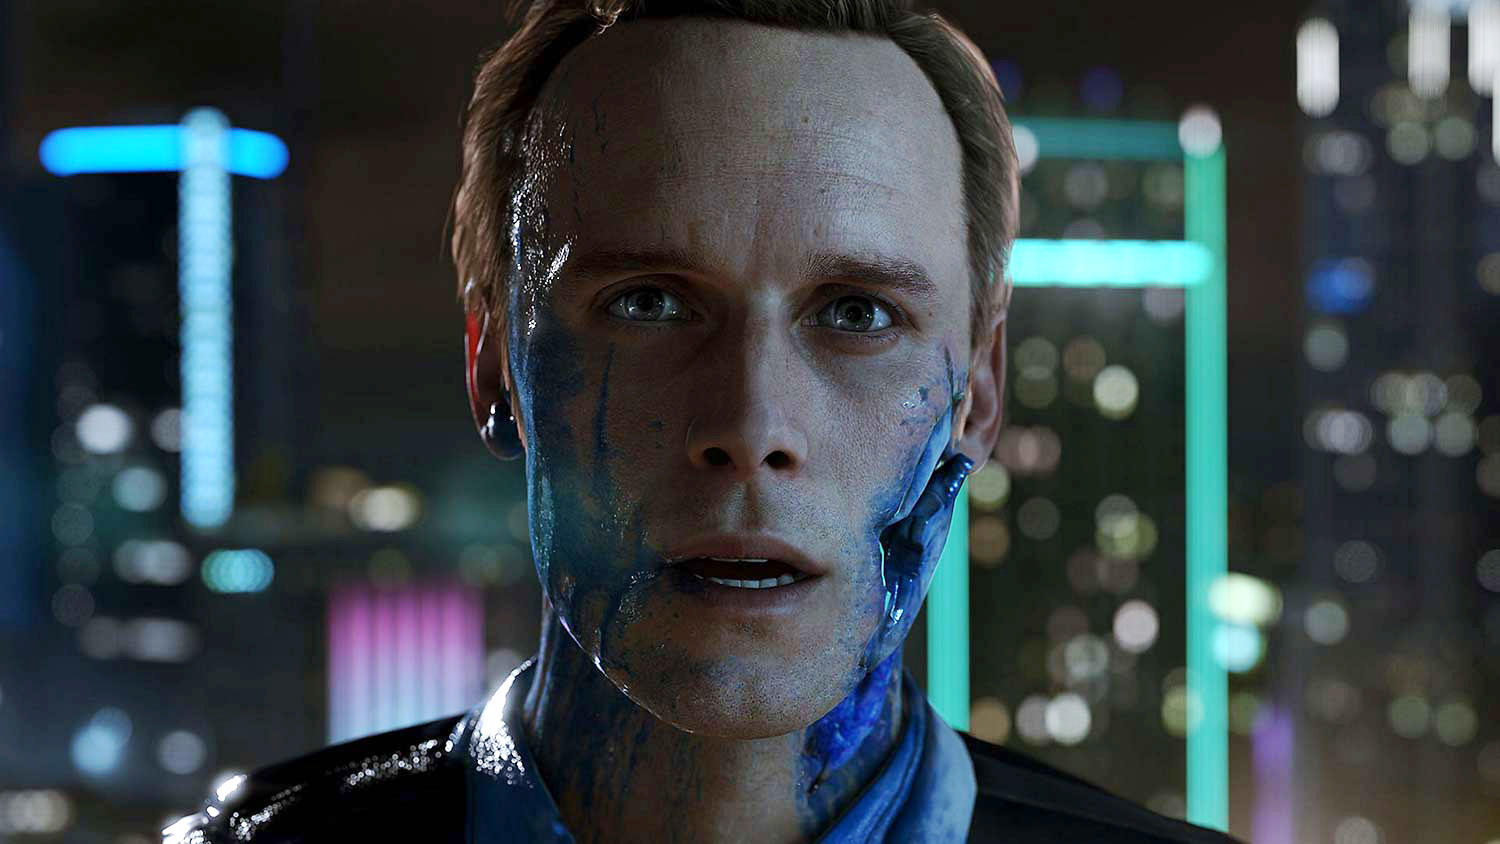 Detroit: Become Human - Sony PlayStation 4 [PS4 Interactive Story